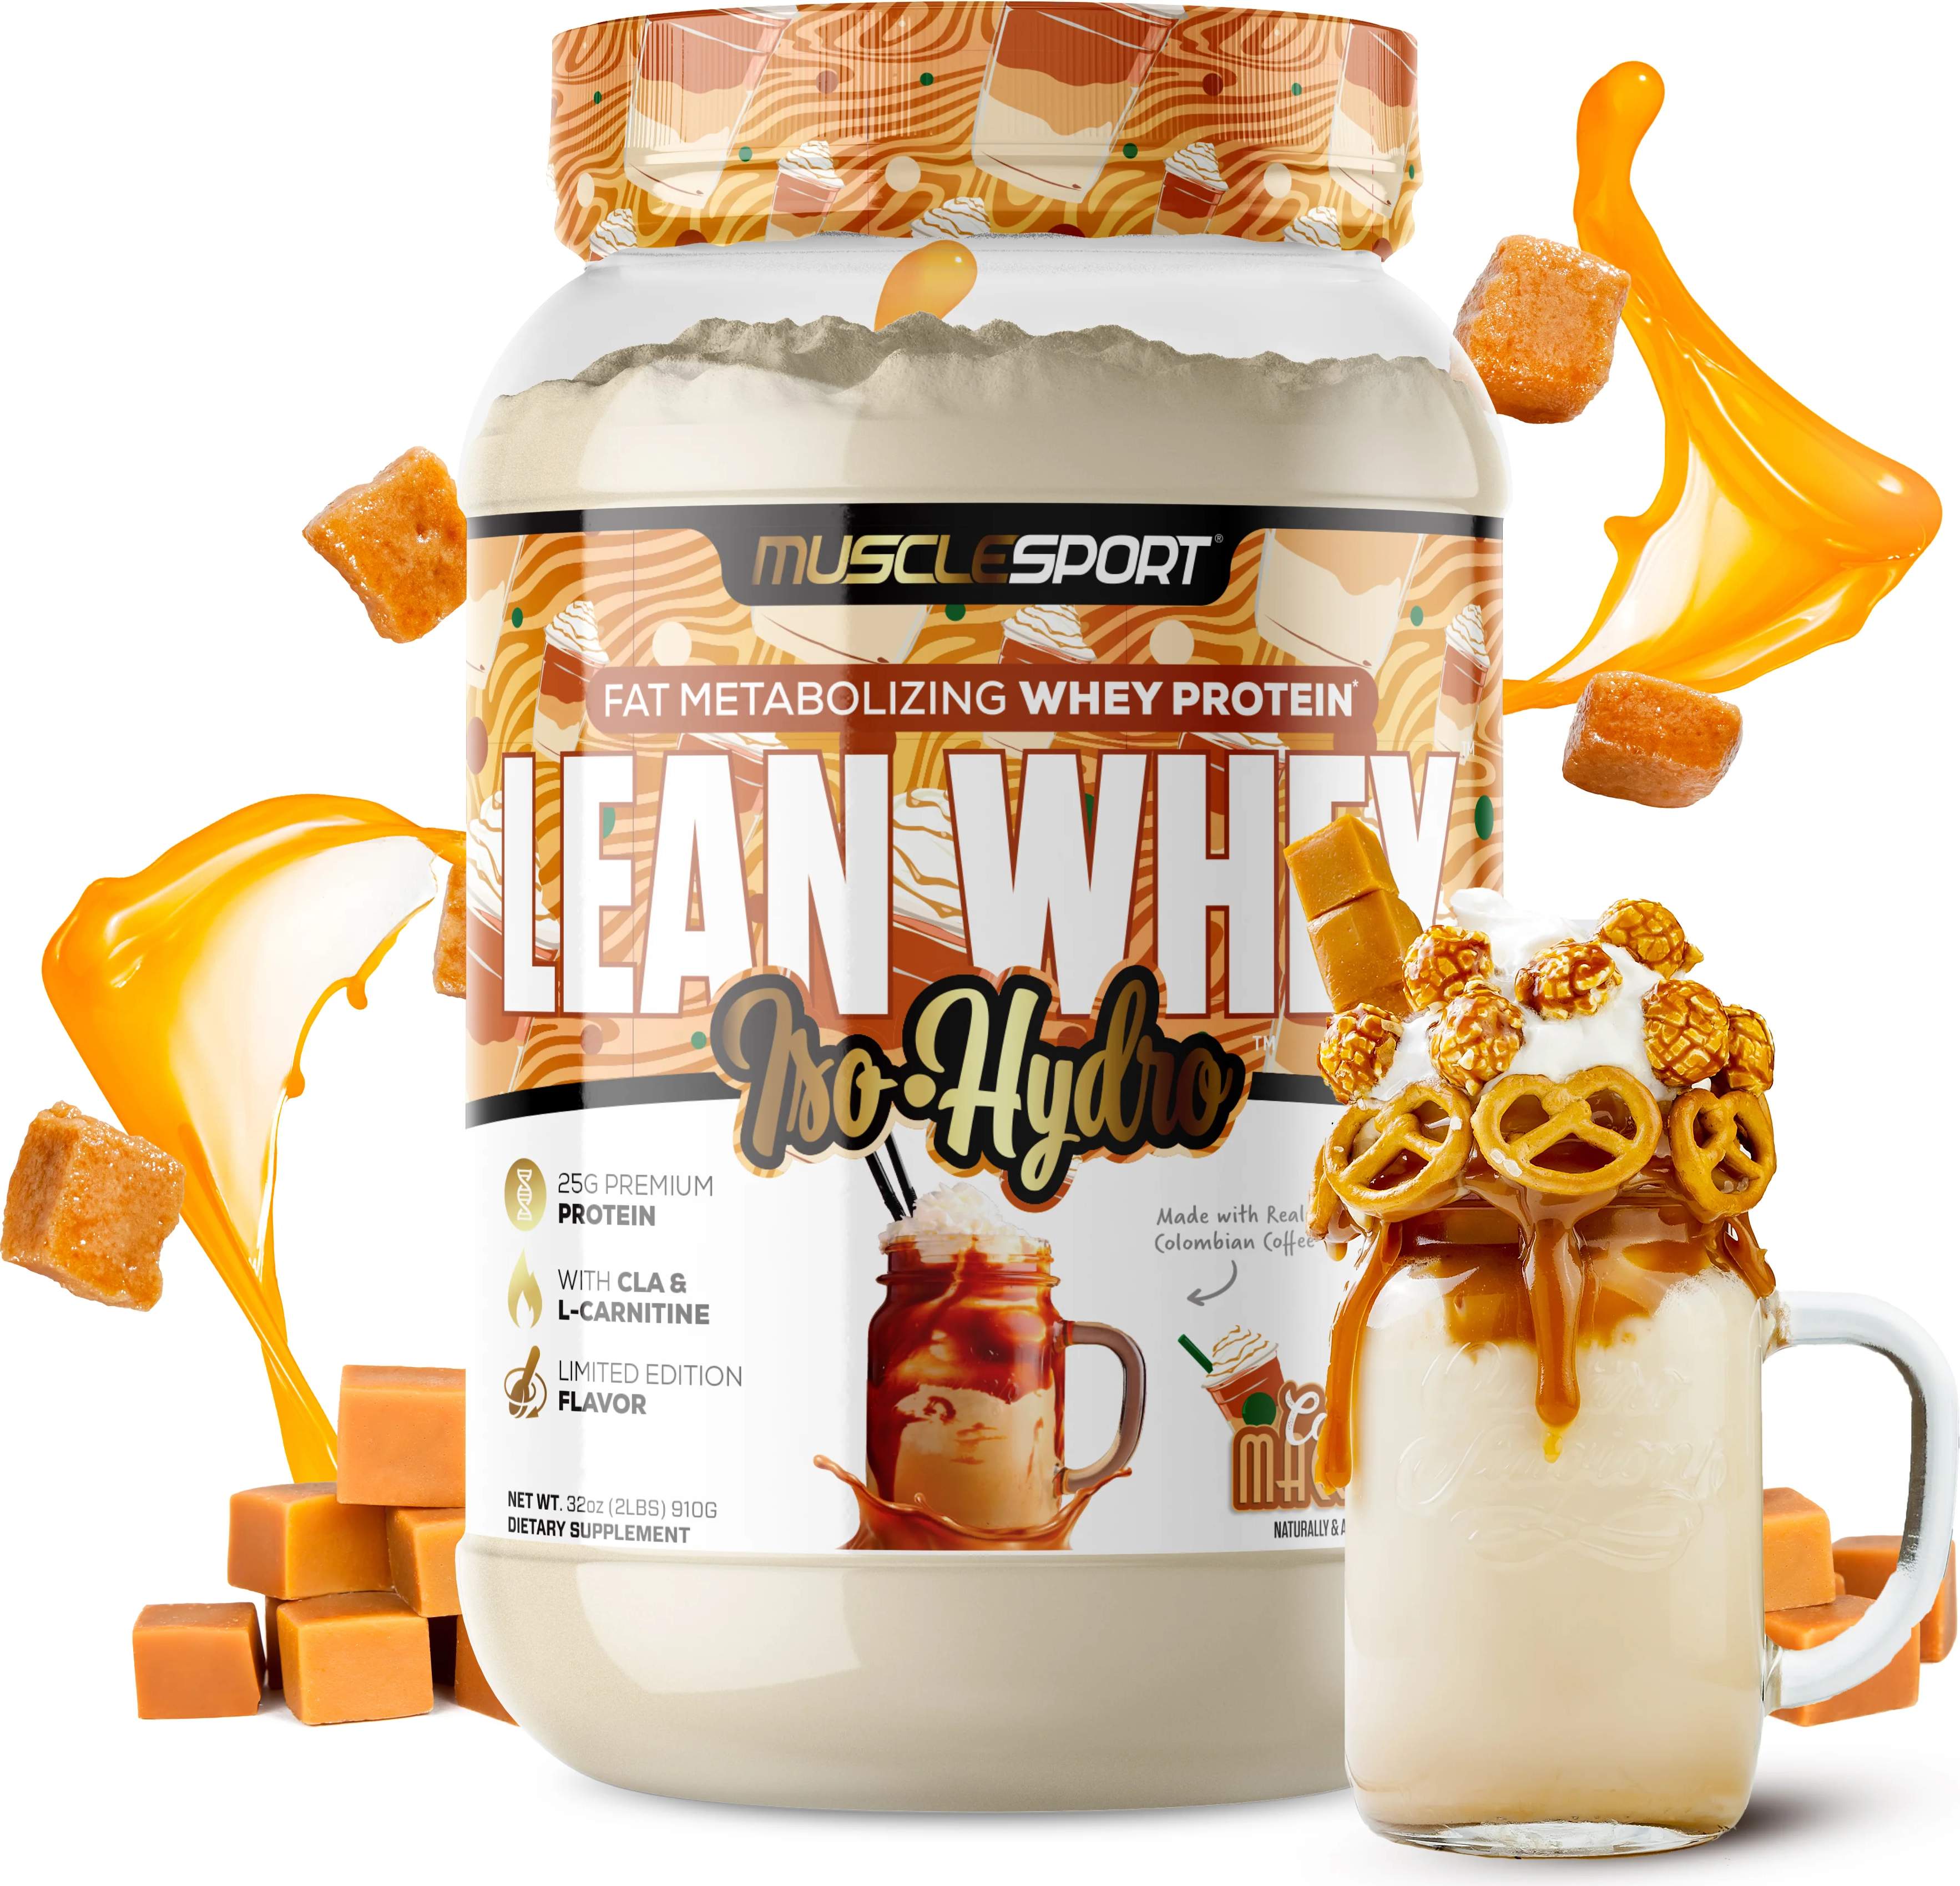 https://www.priceplow.com/static/images/products/musclesport-lean-whey.png